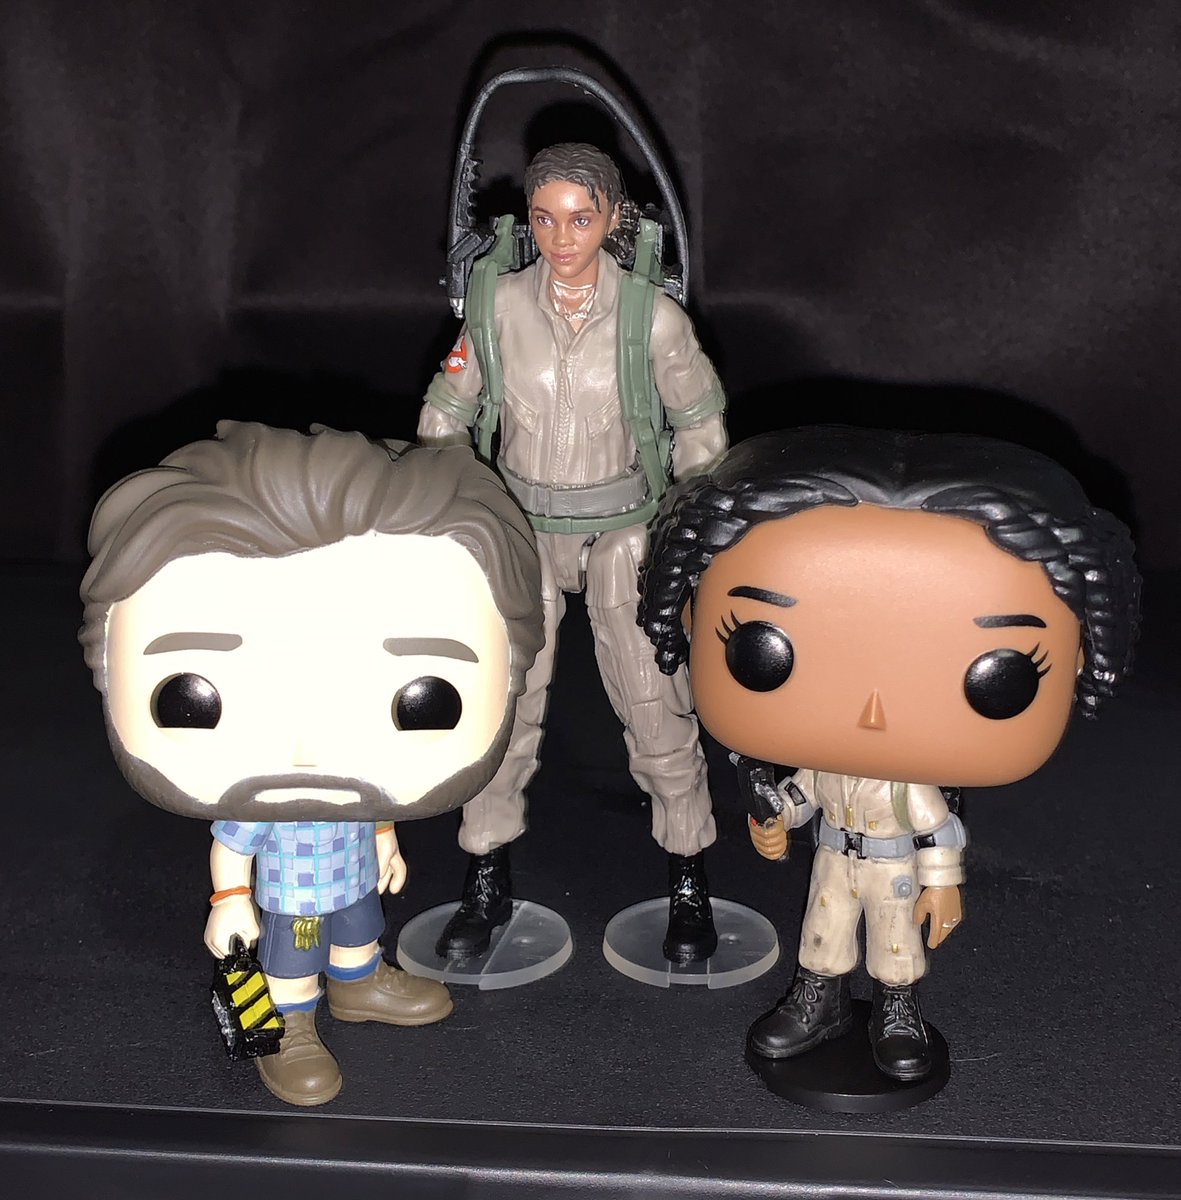 Day 20: Ghostbusters Collection Movie Highlight: Ghostbusters: Afterlife
This is a much smaller collection but I still like it!
🚫
👻
#ghostbusters #ghostbuster #ghostbustersafterlife #PhoebeSpengler #LuckyDomingo #GaryGrooberson #EgonSpengler #collection #actionfigures #funkopop